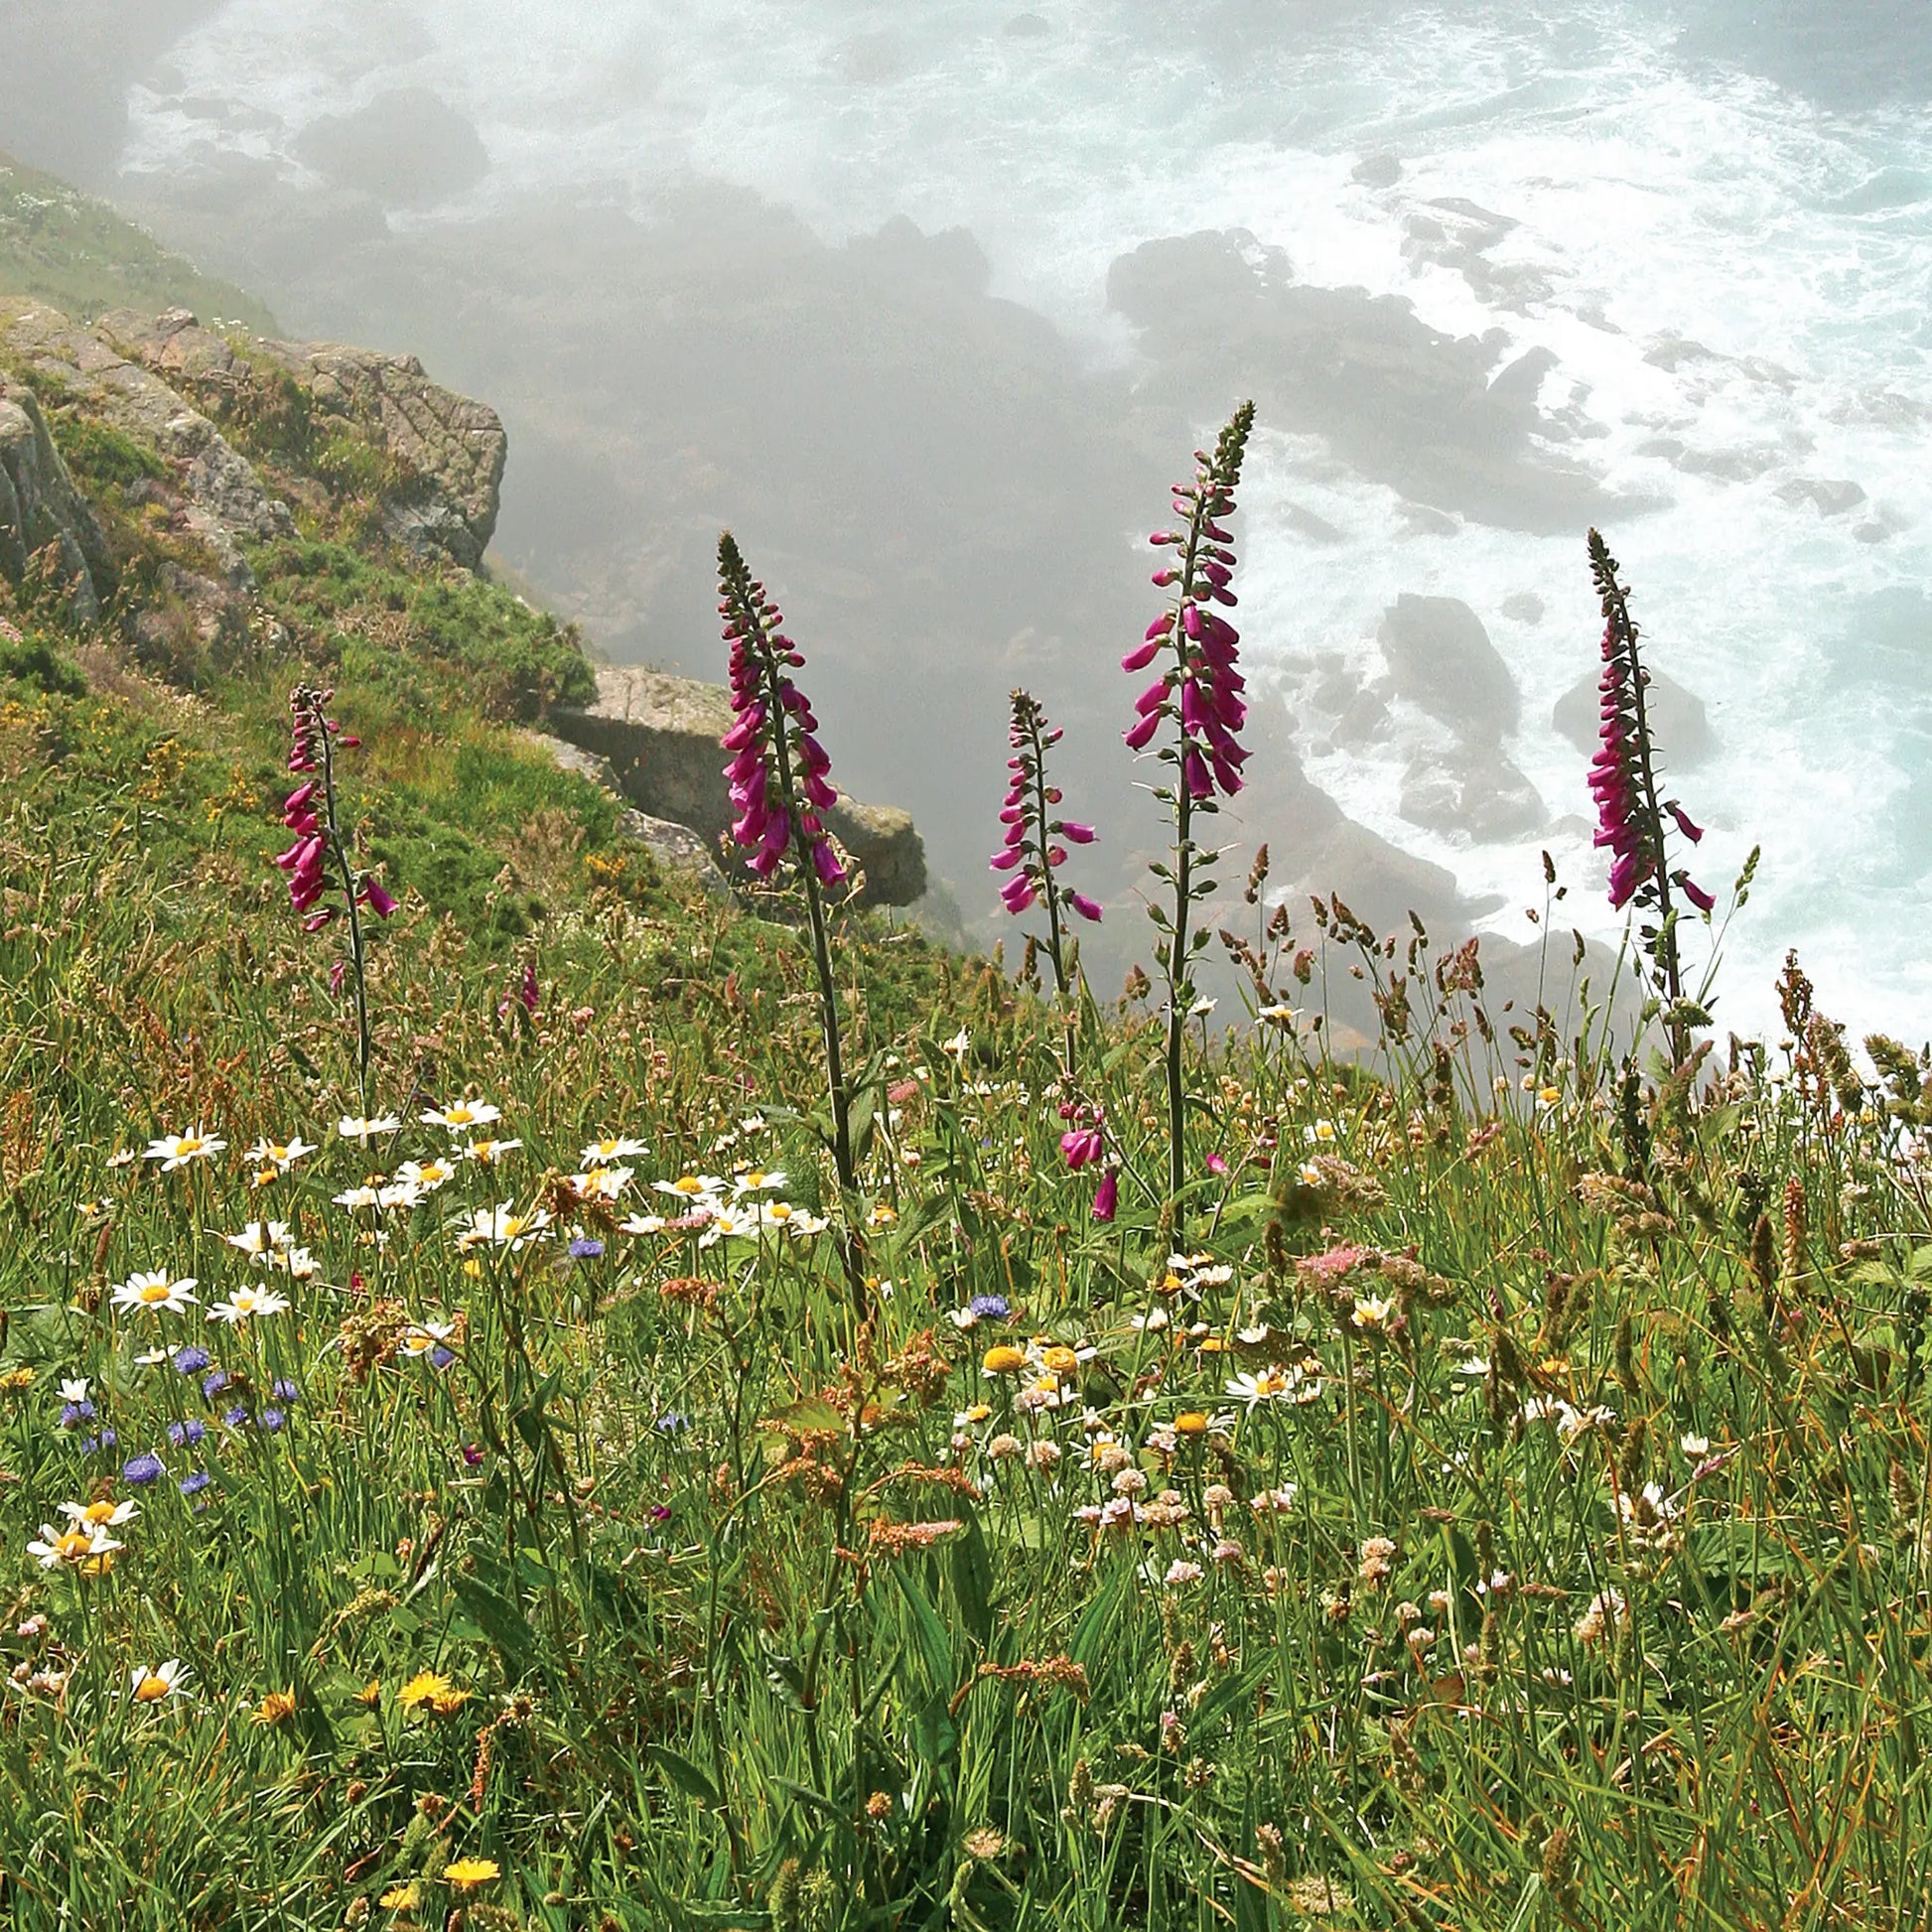 Cornish greetings card image of flowers on a clifftop